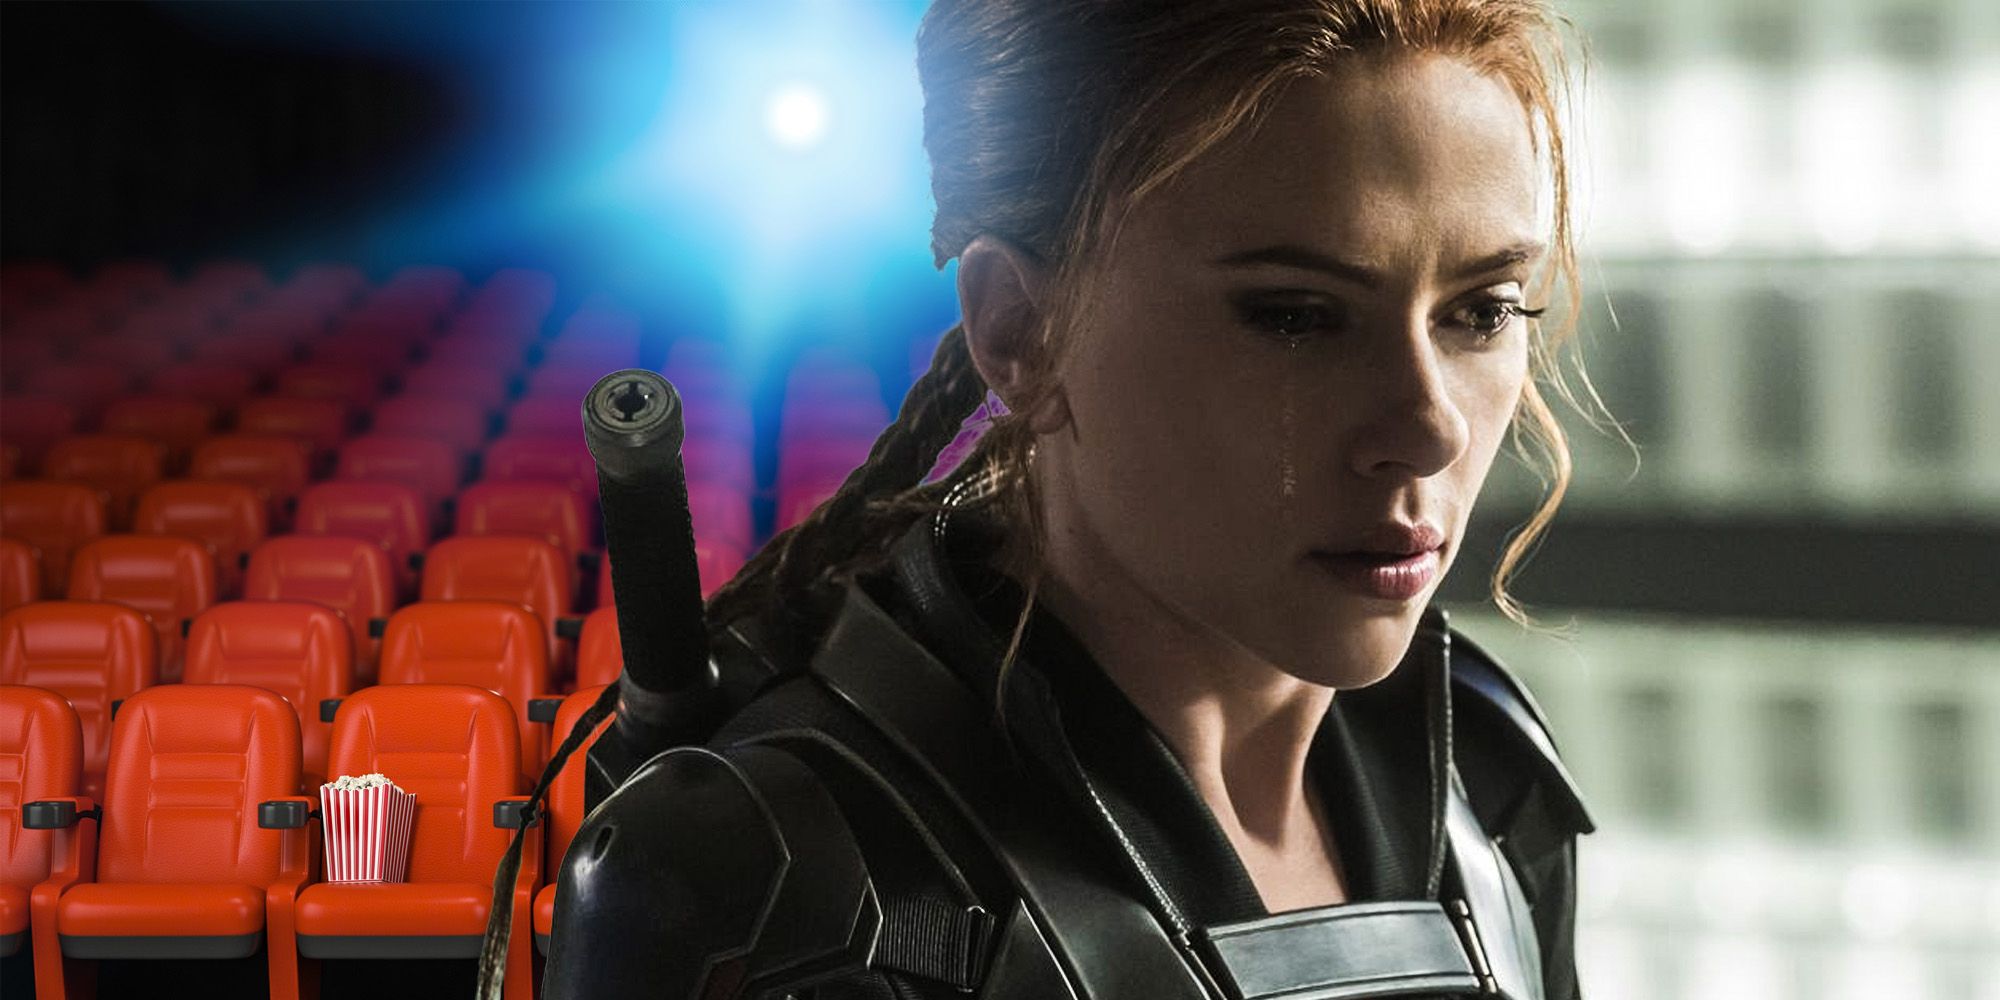 Black widow Box office numbers disappointing for Marvel and Disney